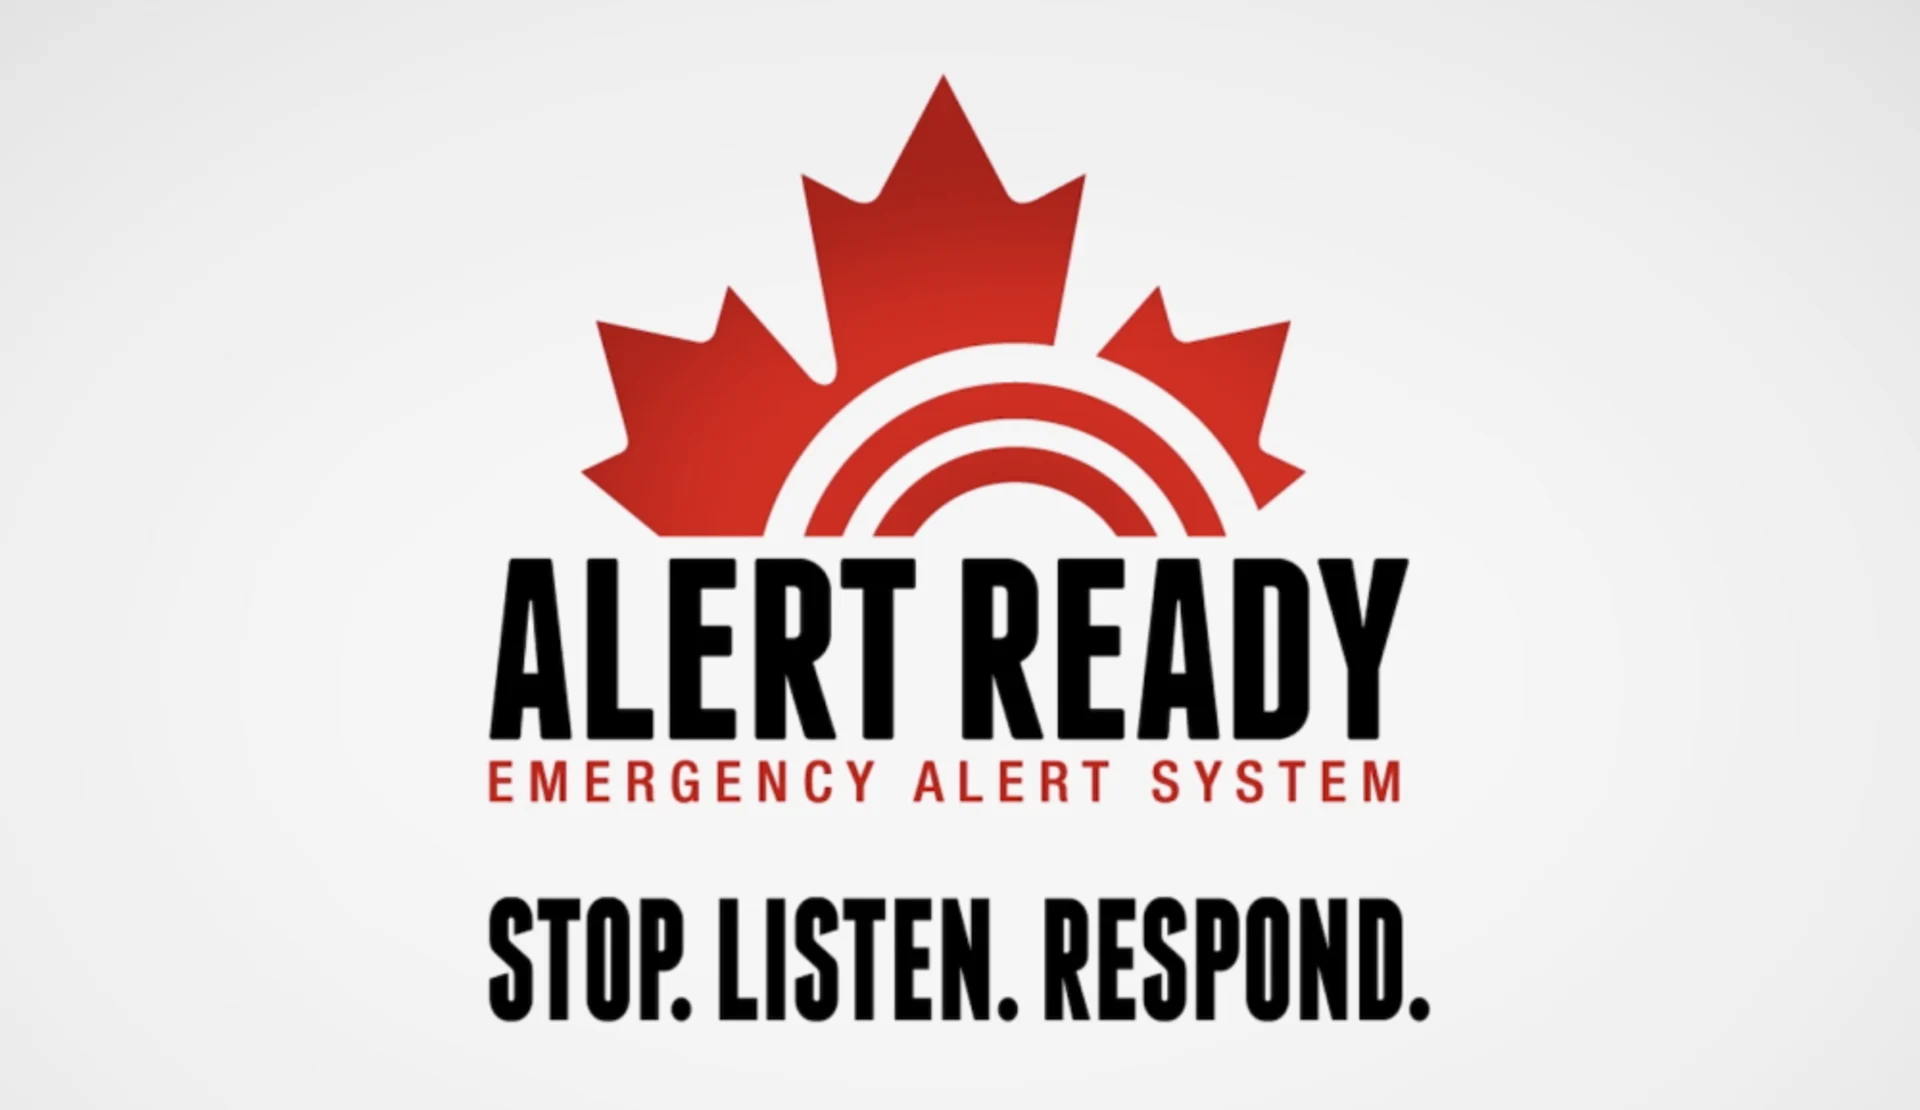 Did you receive a TEST emergency alert? Here's why it was issued